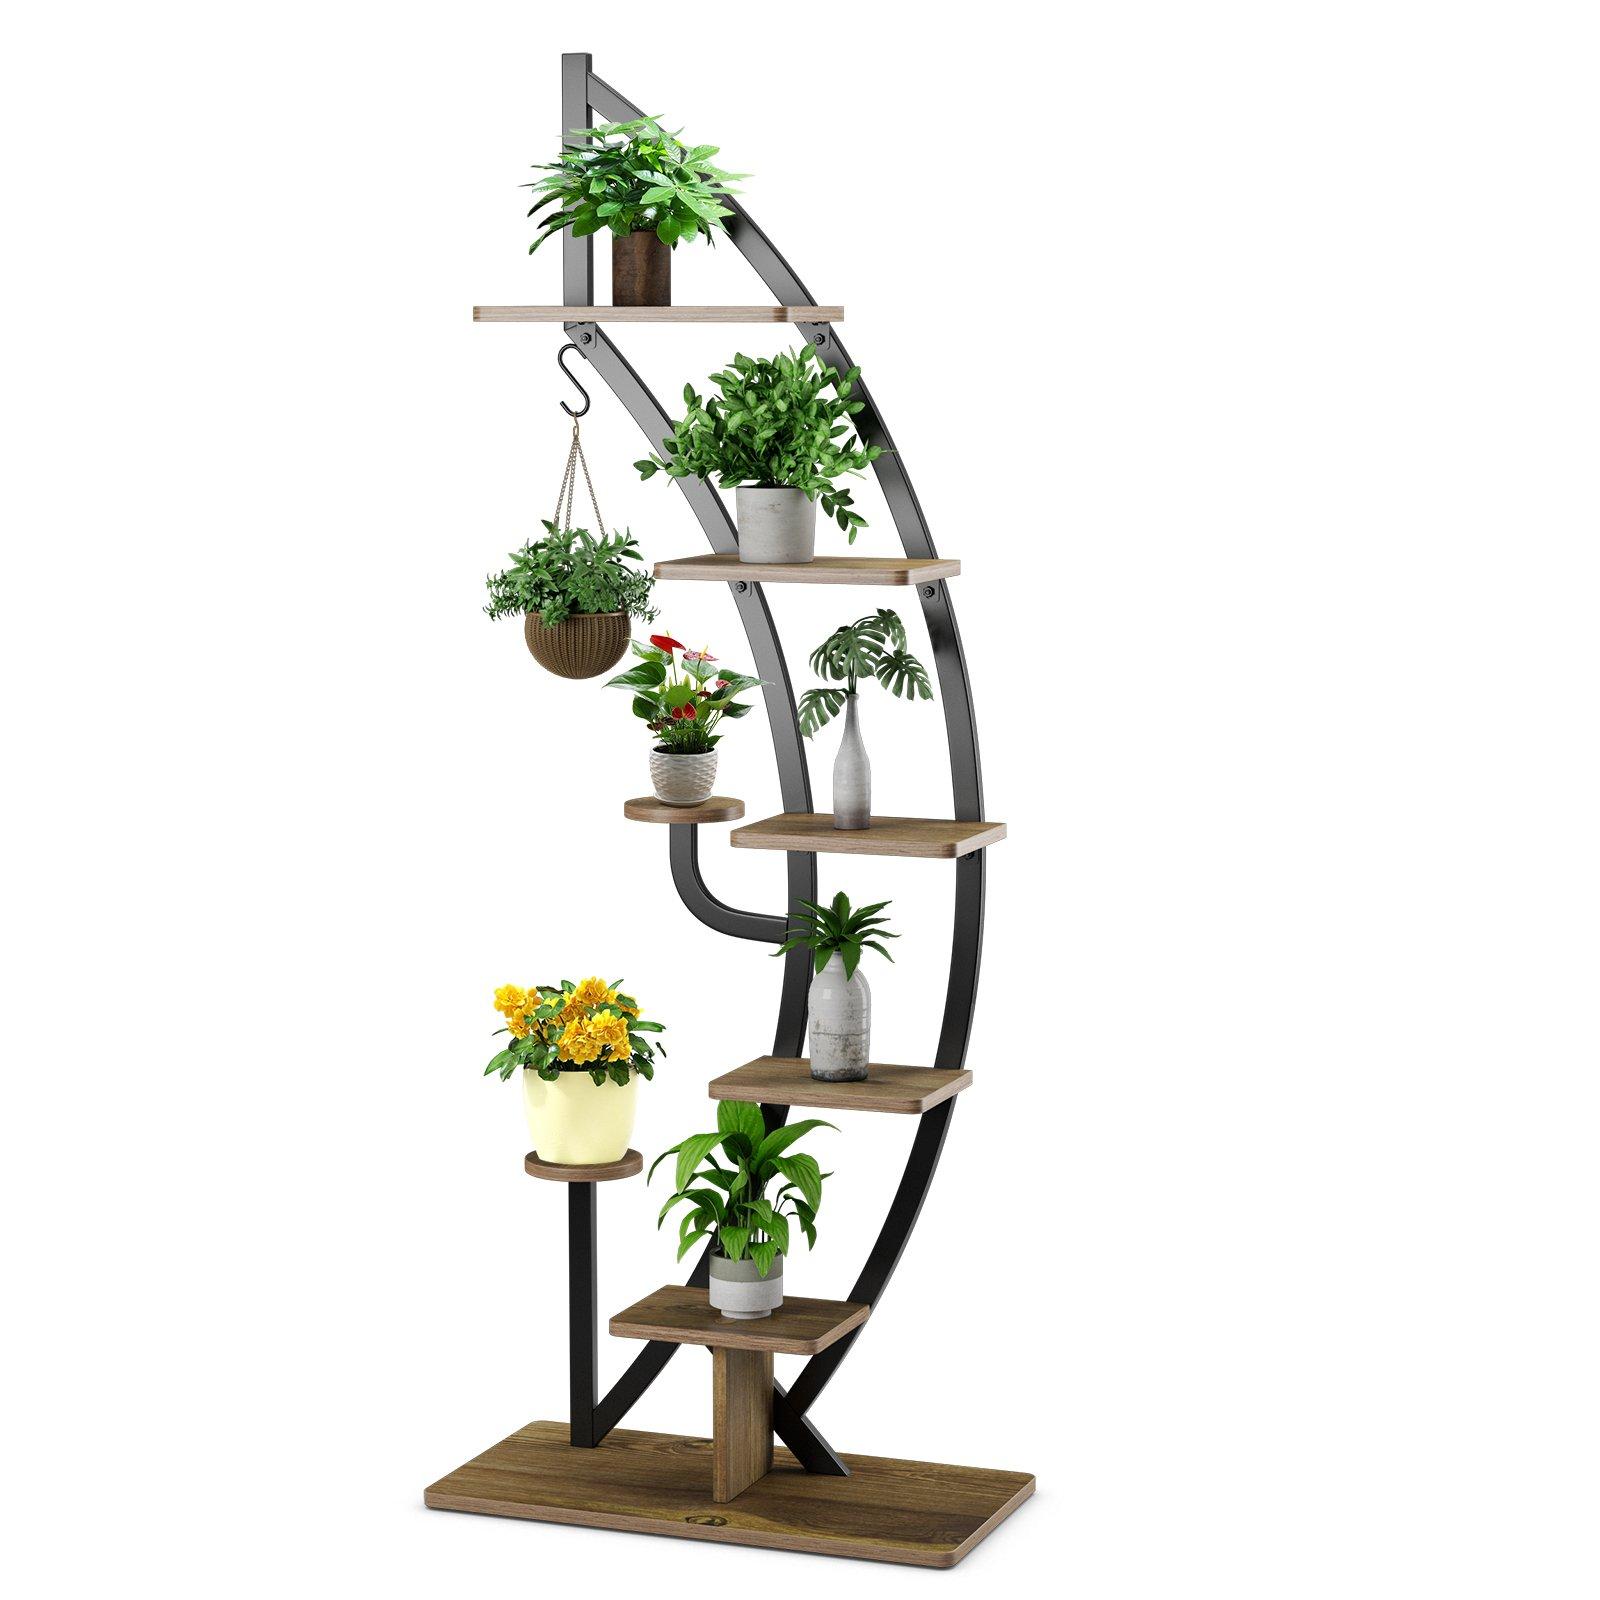 8-Tier Plant Stand Curved Half Moon Shape Ladder Flowers Shelf with Hook